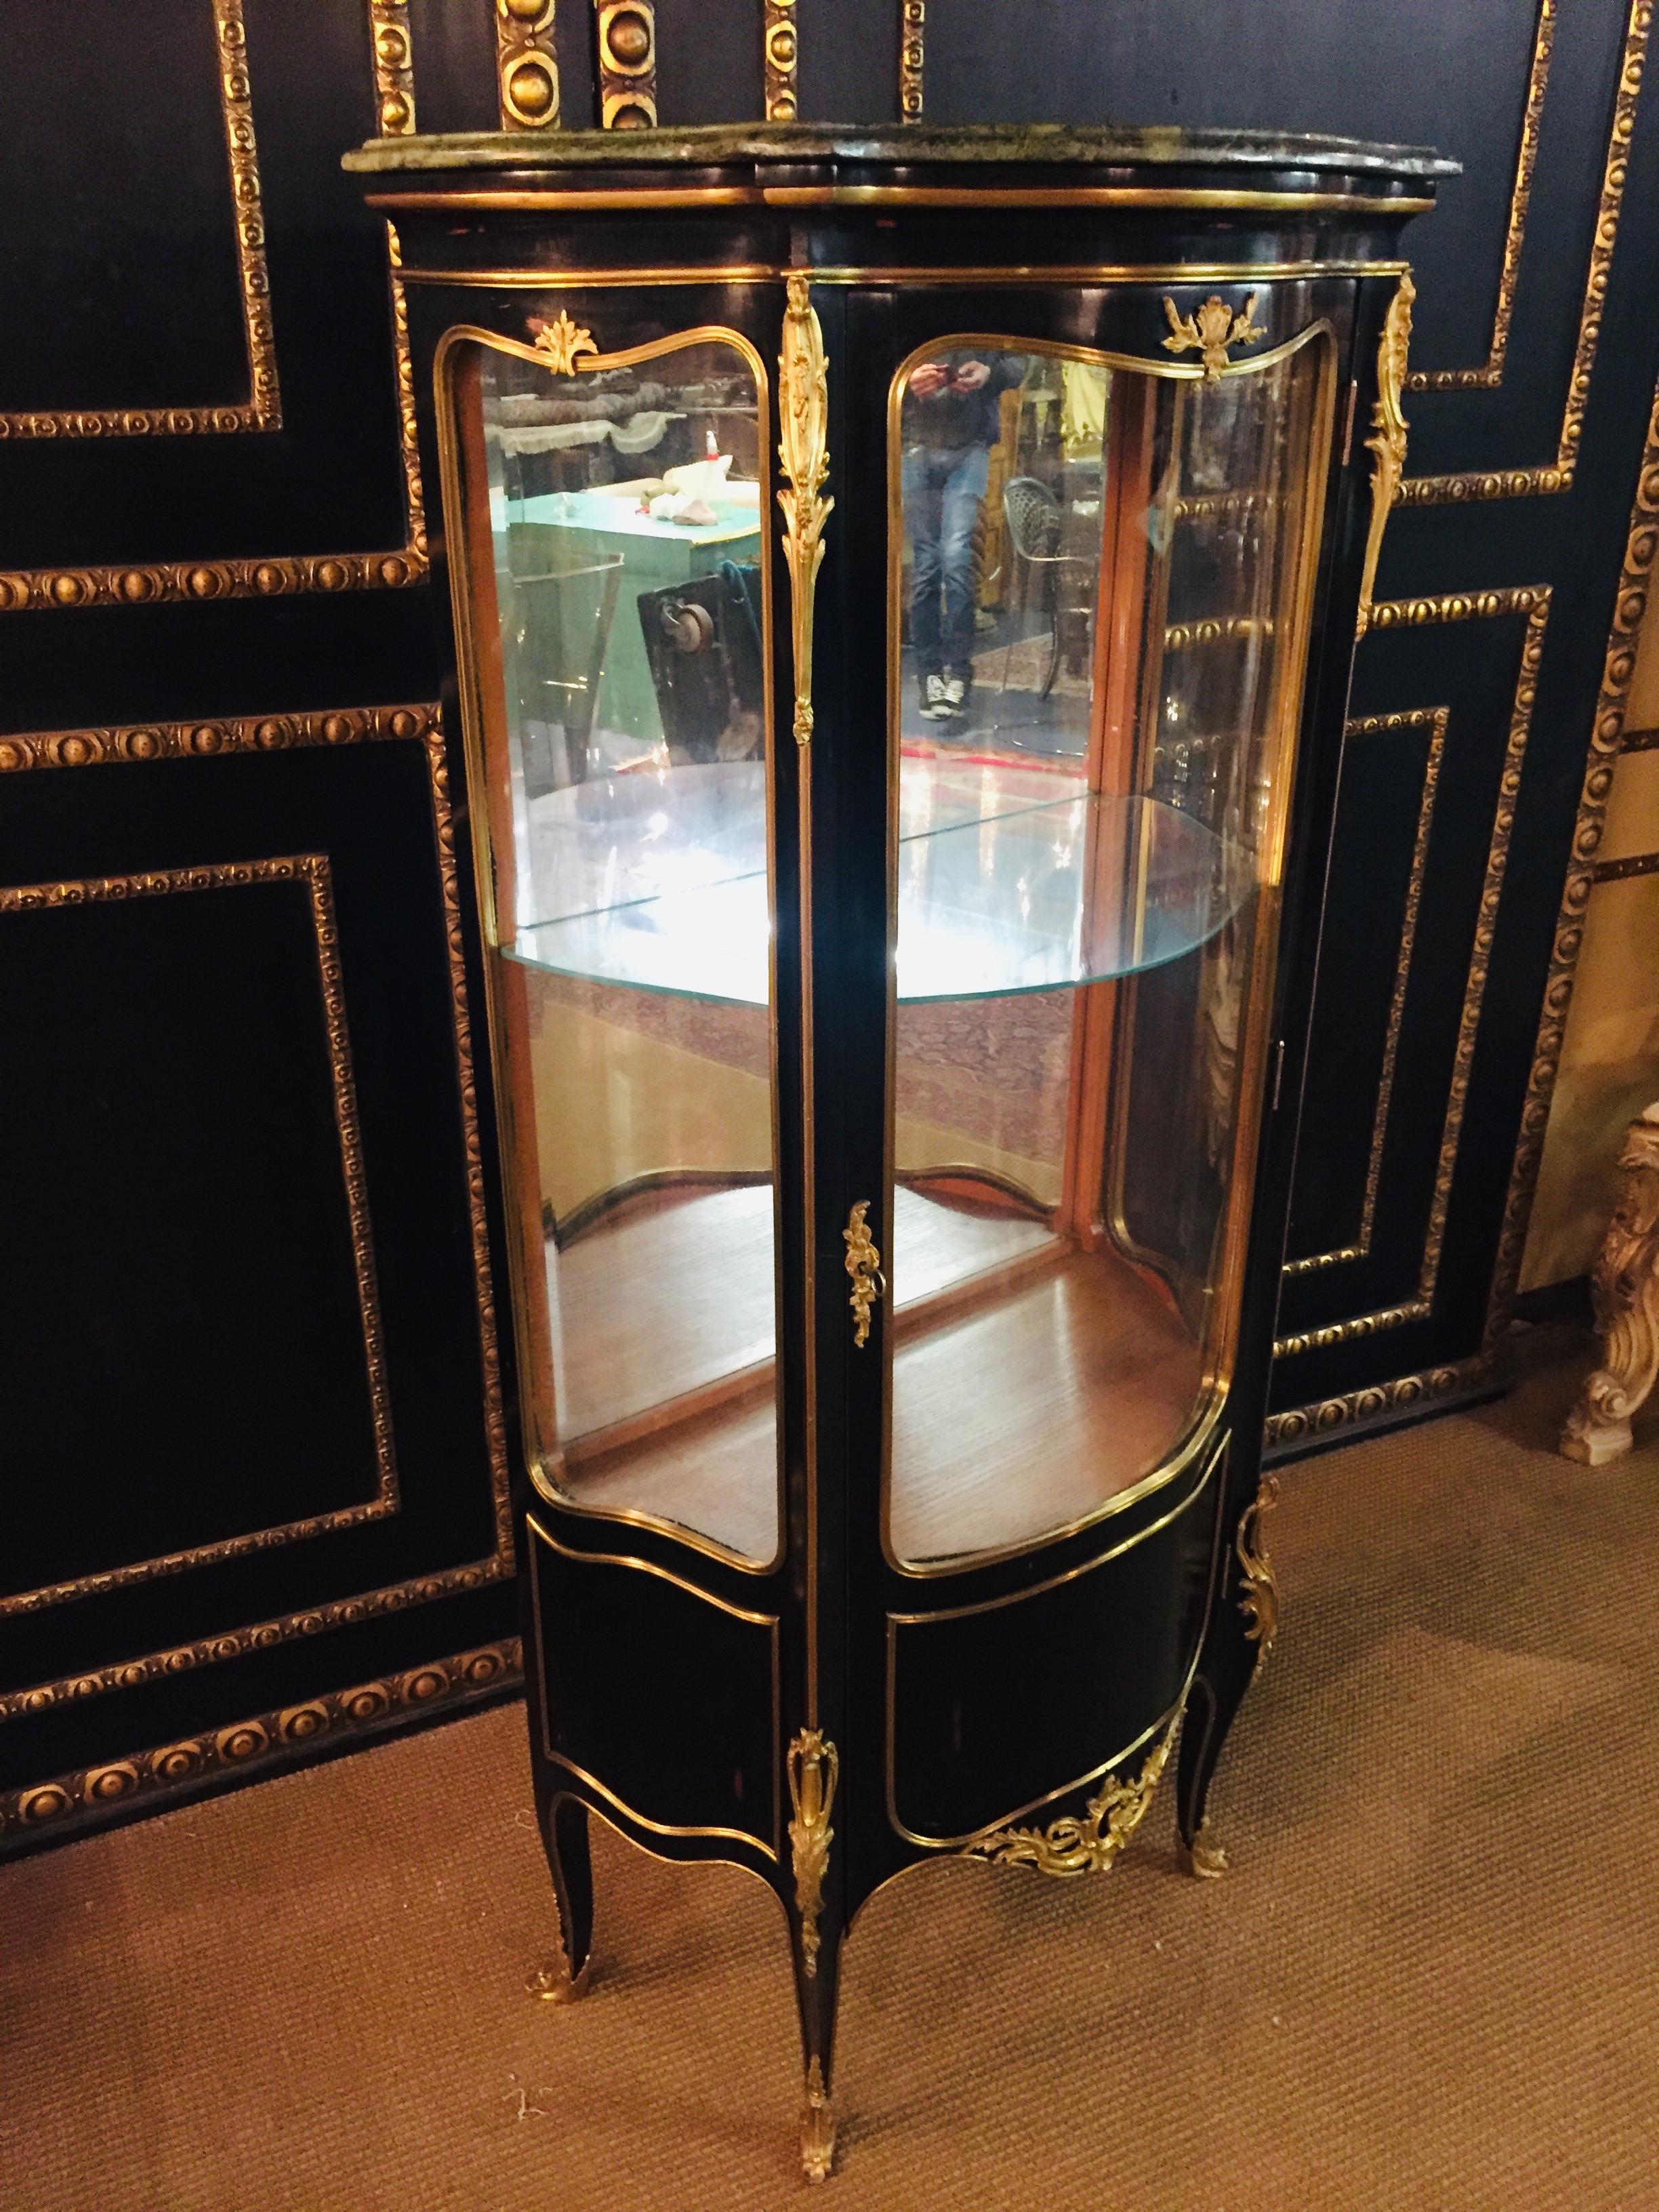 Petite French vitrine in the style of Louis XV Rococo Piano black polished veneer on solid beechwood high-octagonal, one-armed, curved body, three-sided to three-section, on tall, slanting, curly feet. Profiled cornice with marble top. Inside two